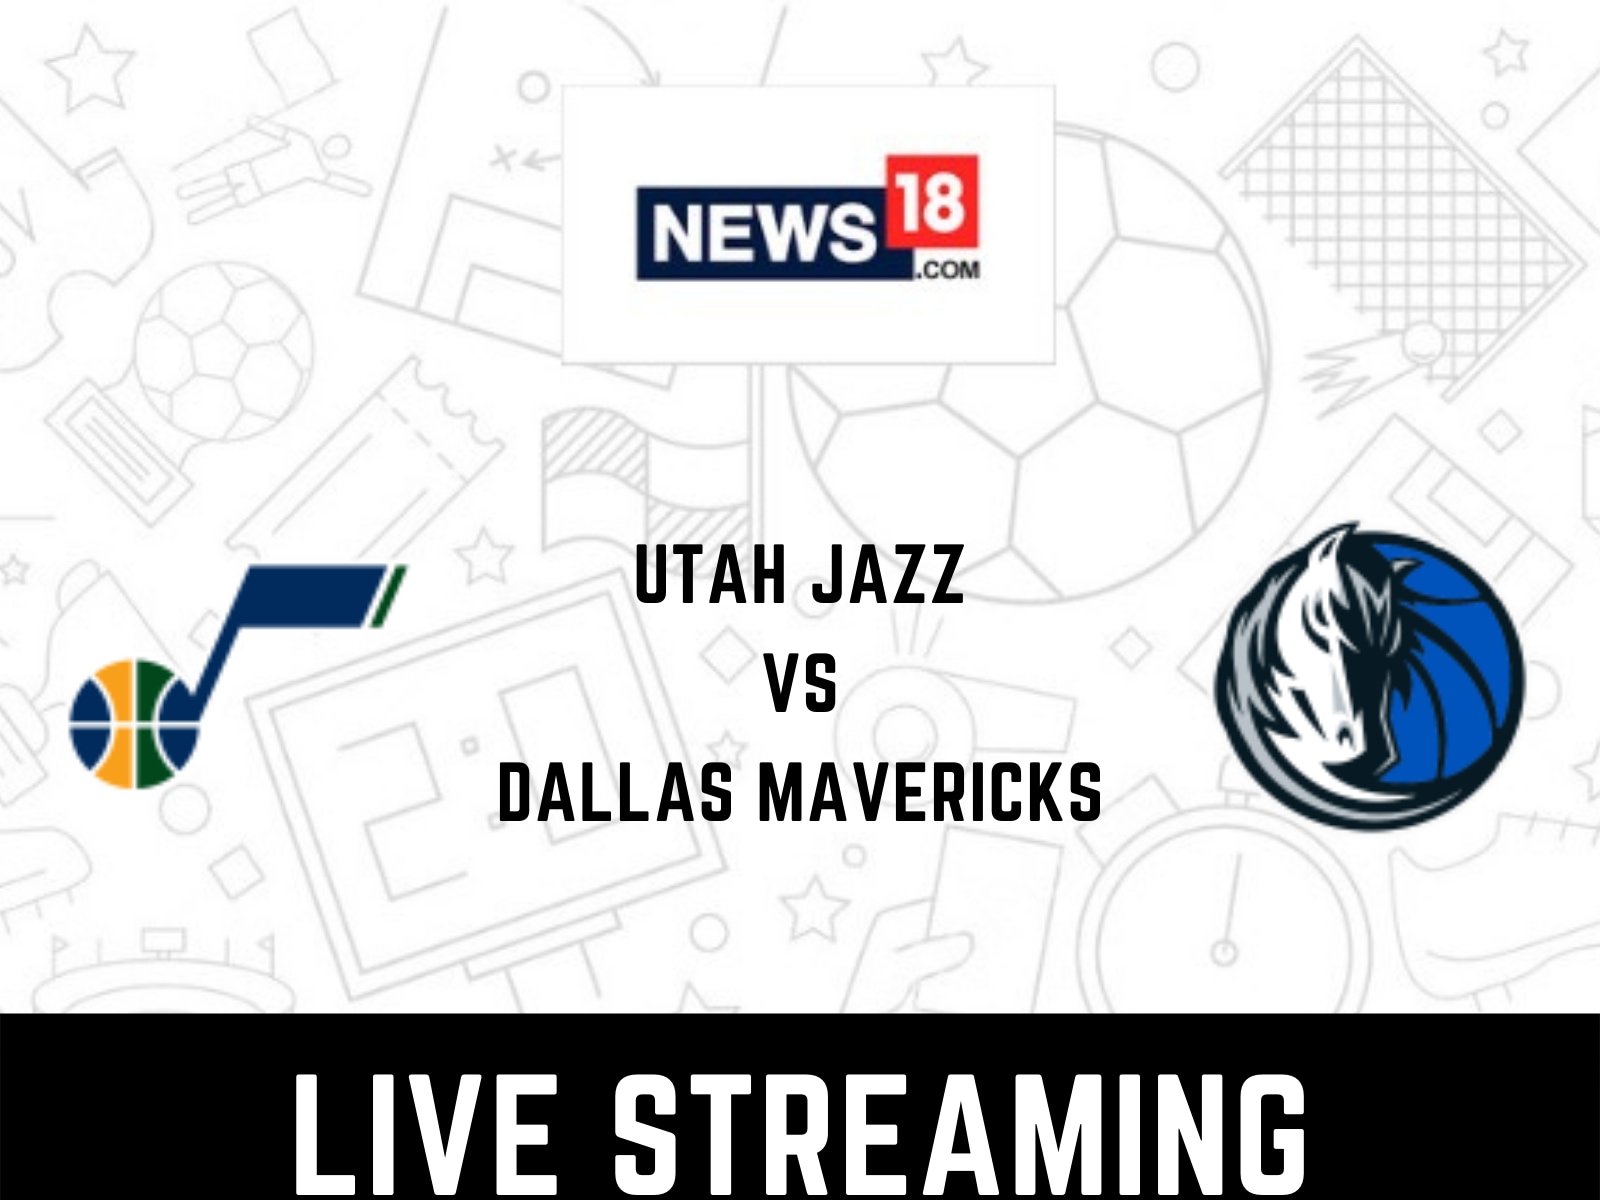 Utah Jazz vs Dallas Mavericks Live Streaming When and Where to Watch NBA 2022 playoffs Live Coverage on Live TV Online